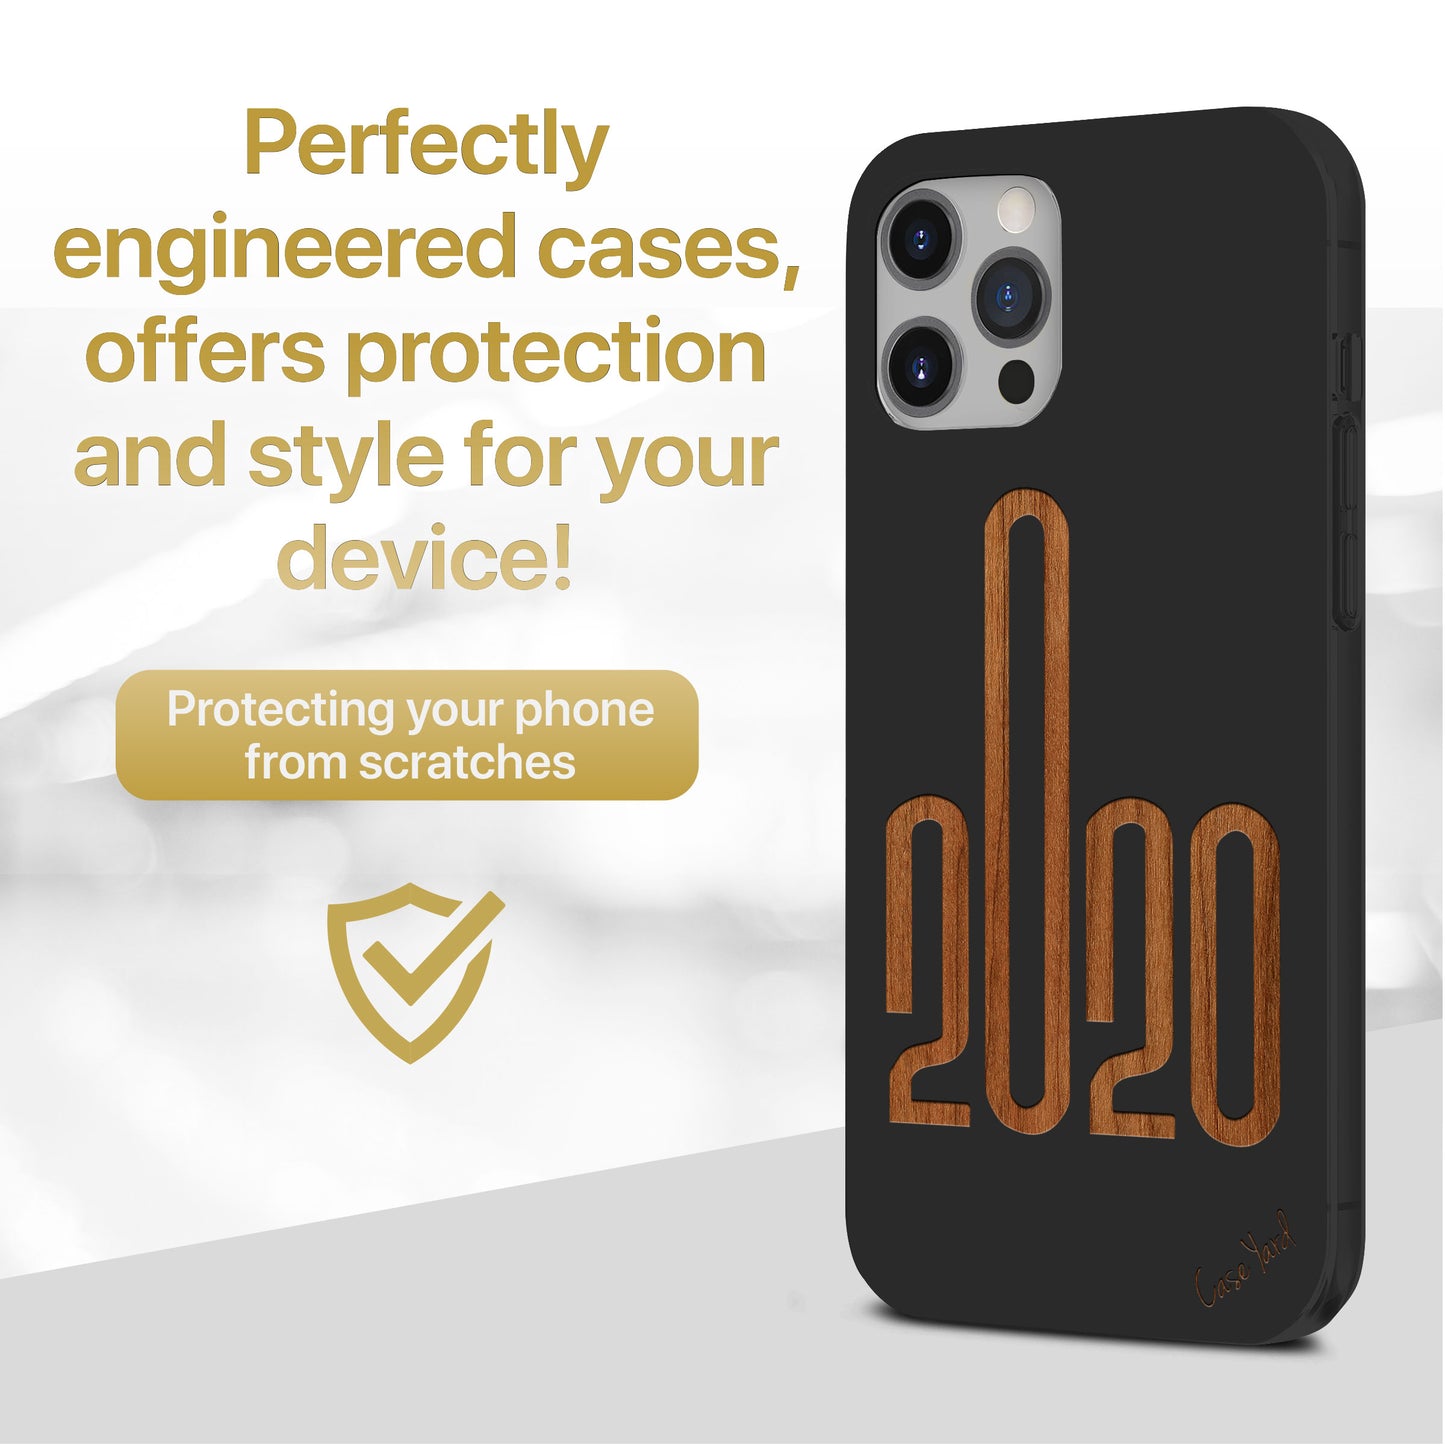 Wooden Cell Phone Case Cover, Laser Engraved case for iPhone & Samsung phone 2020 Design